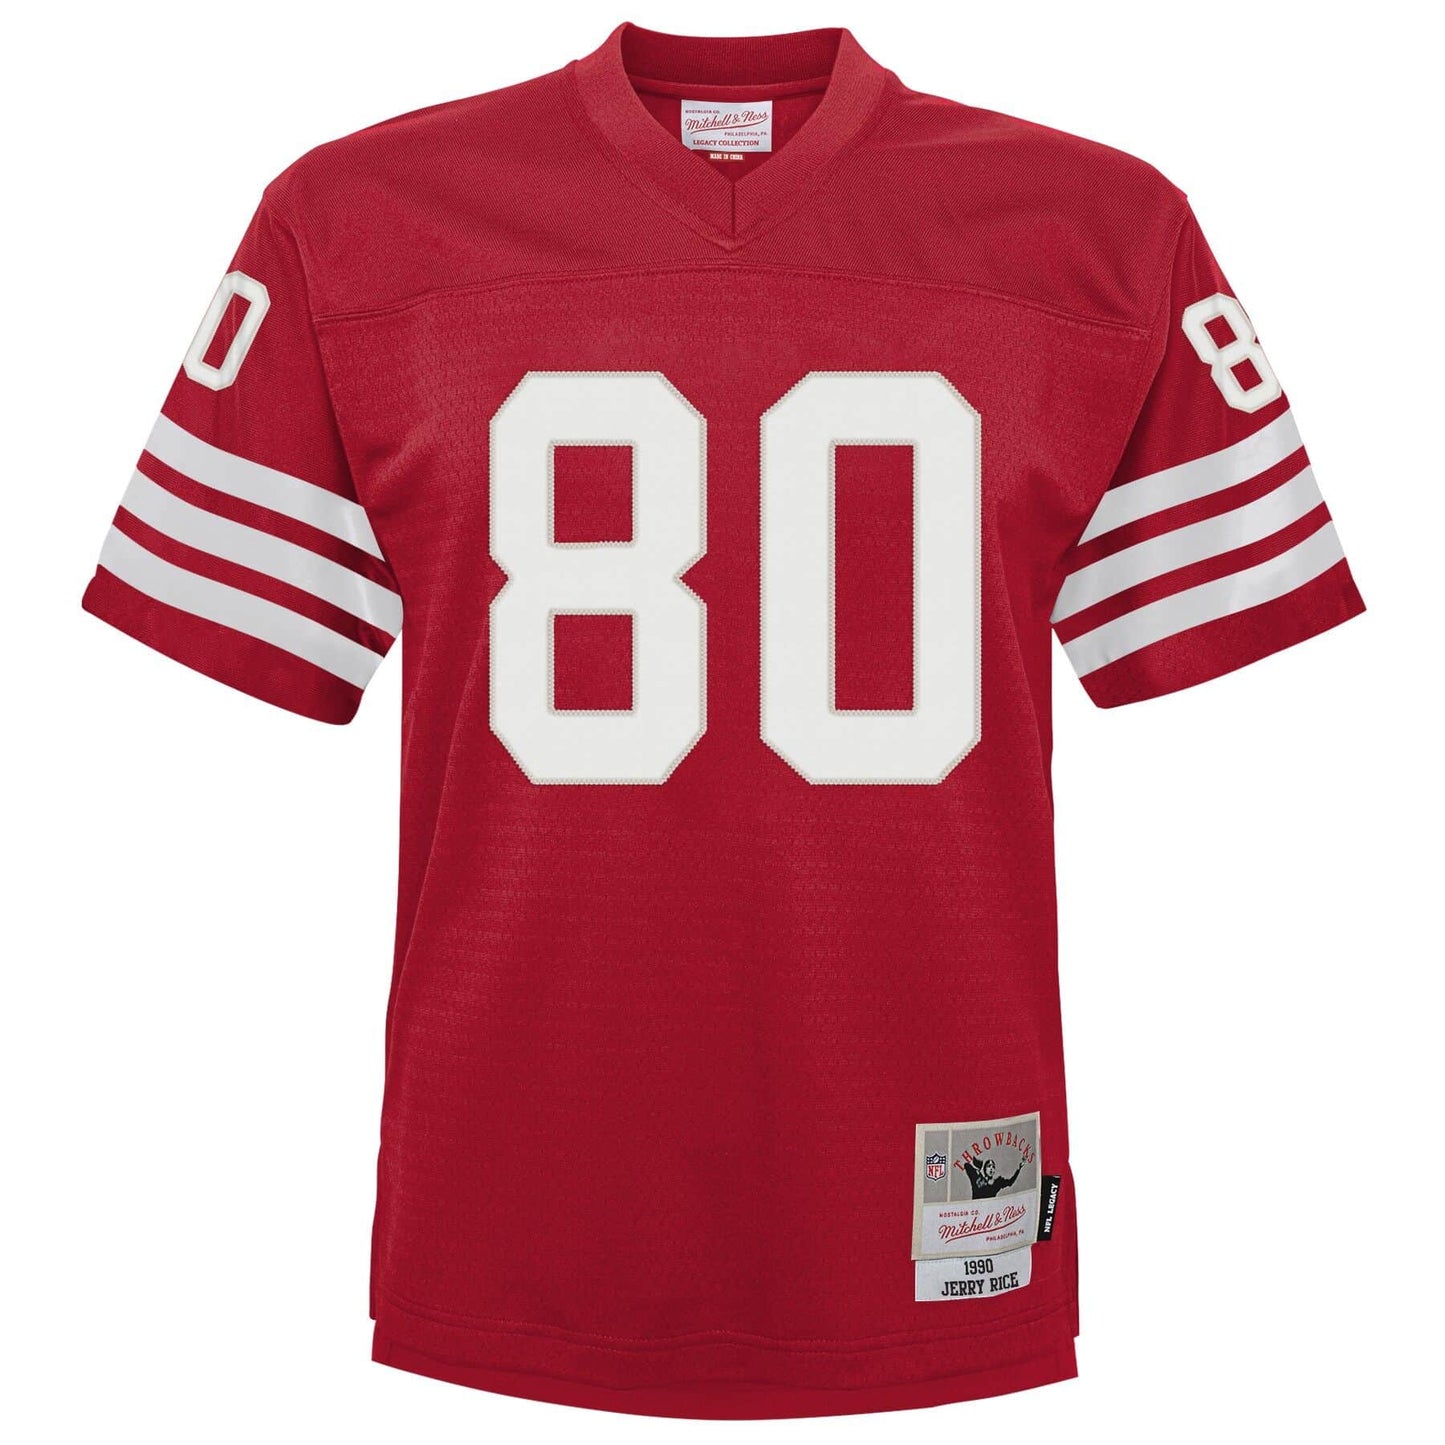 JERRY RICE YOUTH MITCHELL & NESS LEGACY JERSEY